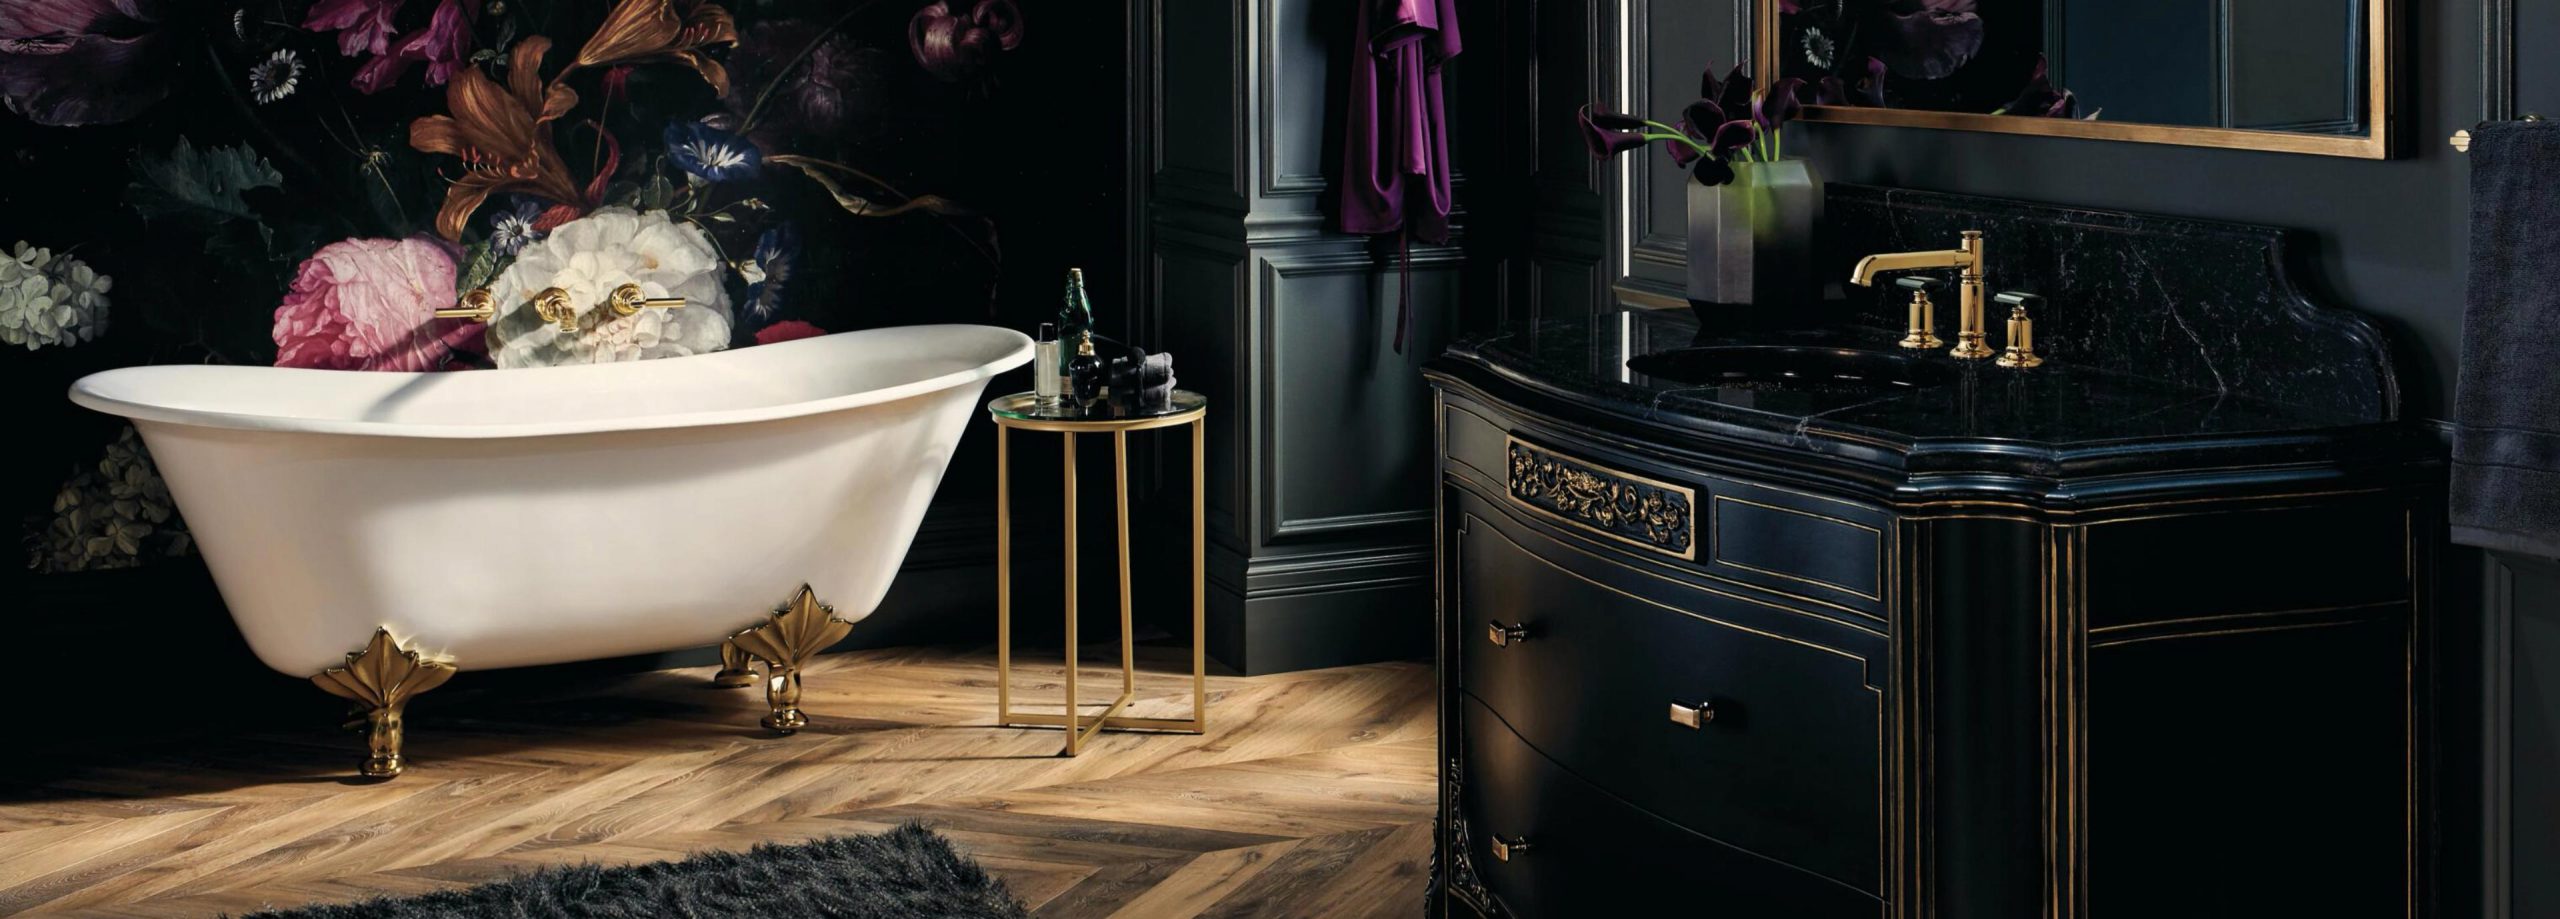 A classic bathroom with dark furniture and features, a wood floor, and a white clawfoot bathtub